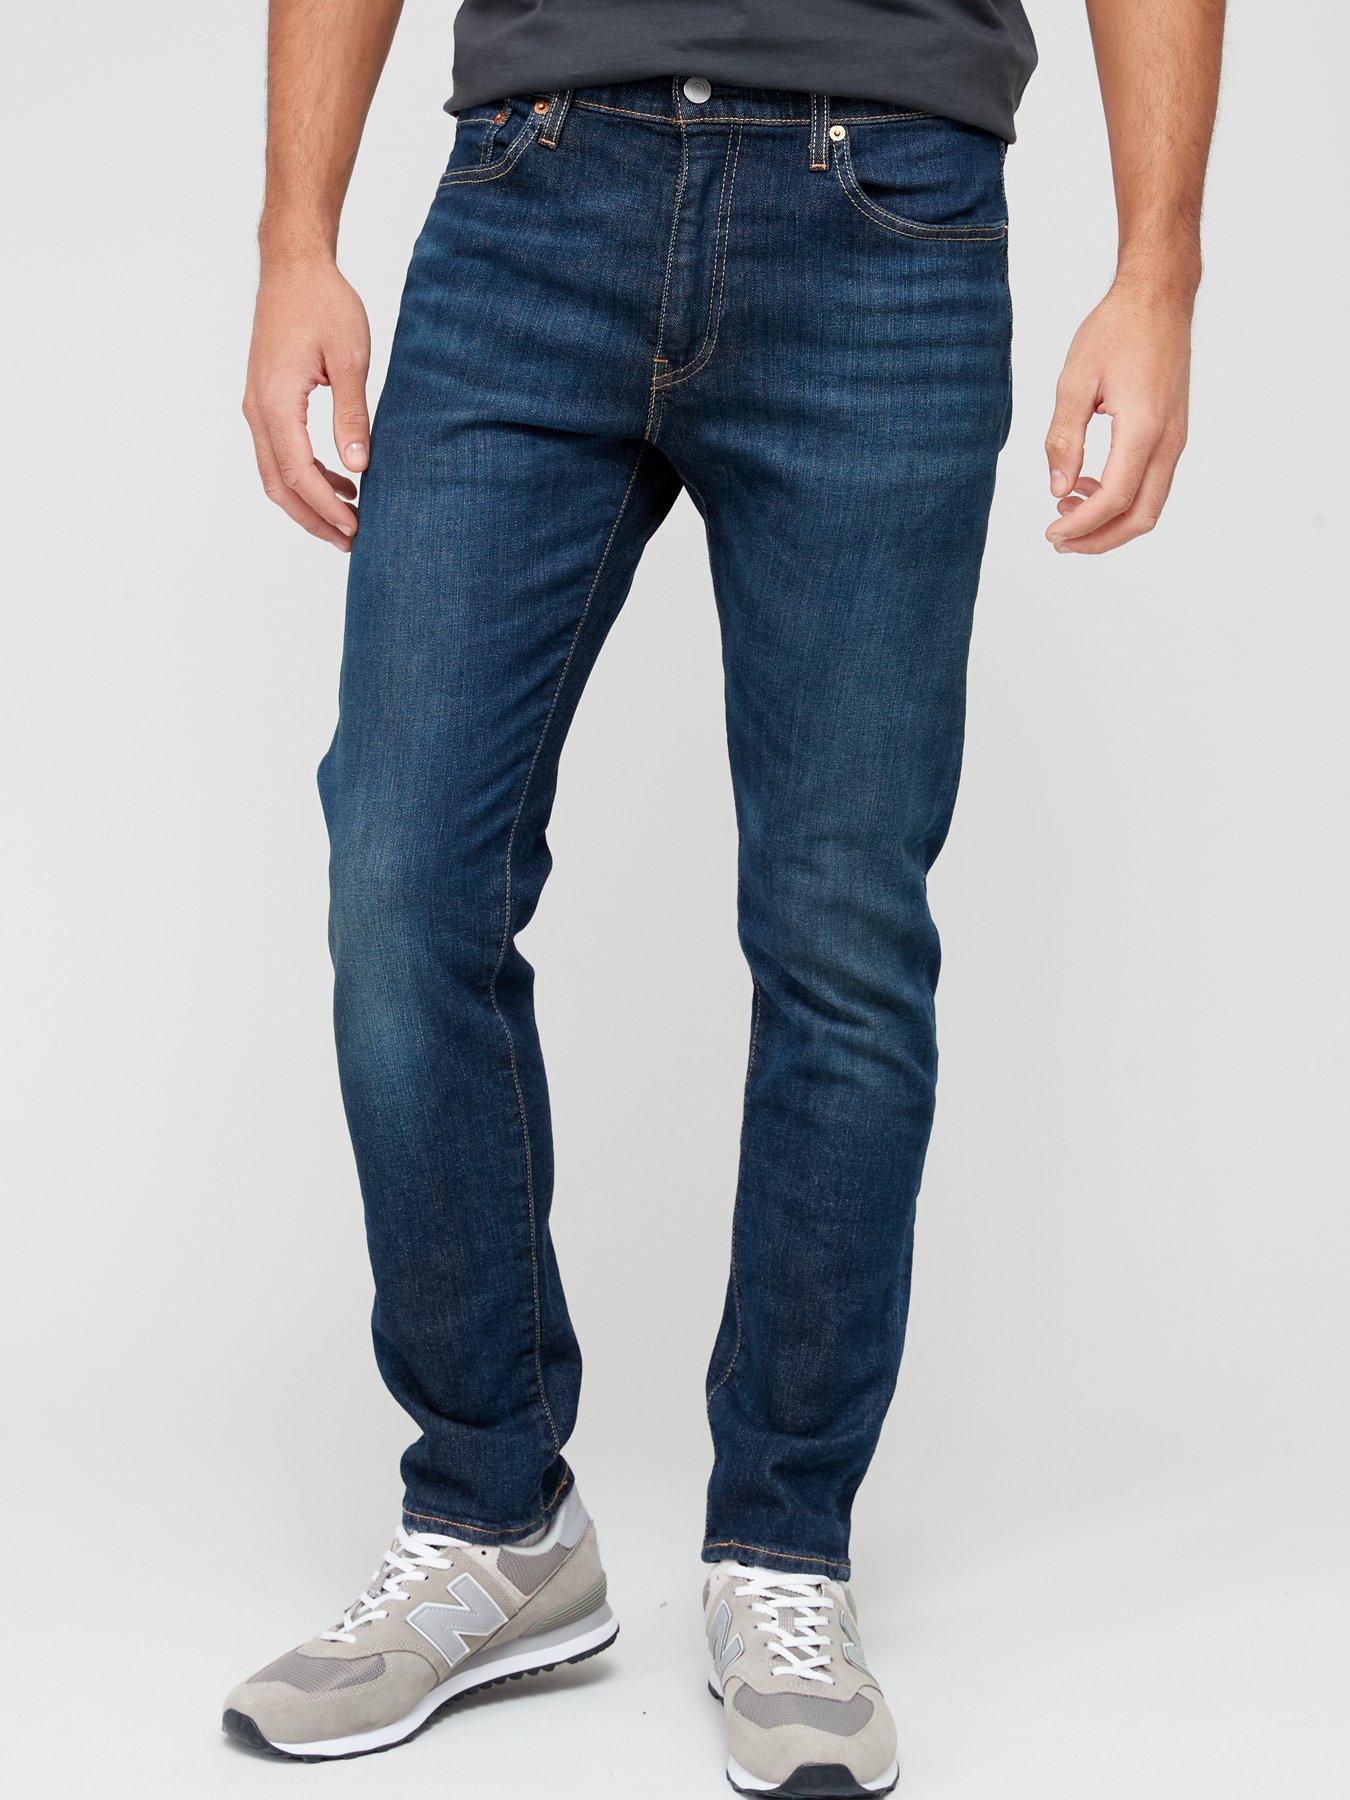 Opaque pause sum Levi's 512 Slim Taper Fit Jeans - Dark Wash | very.co.uk